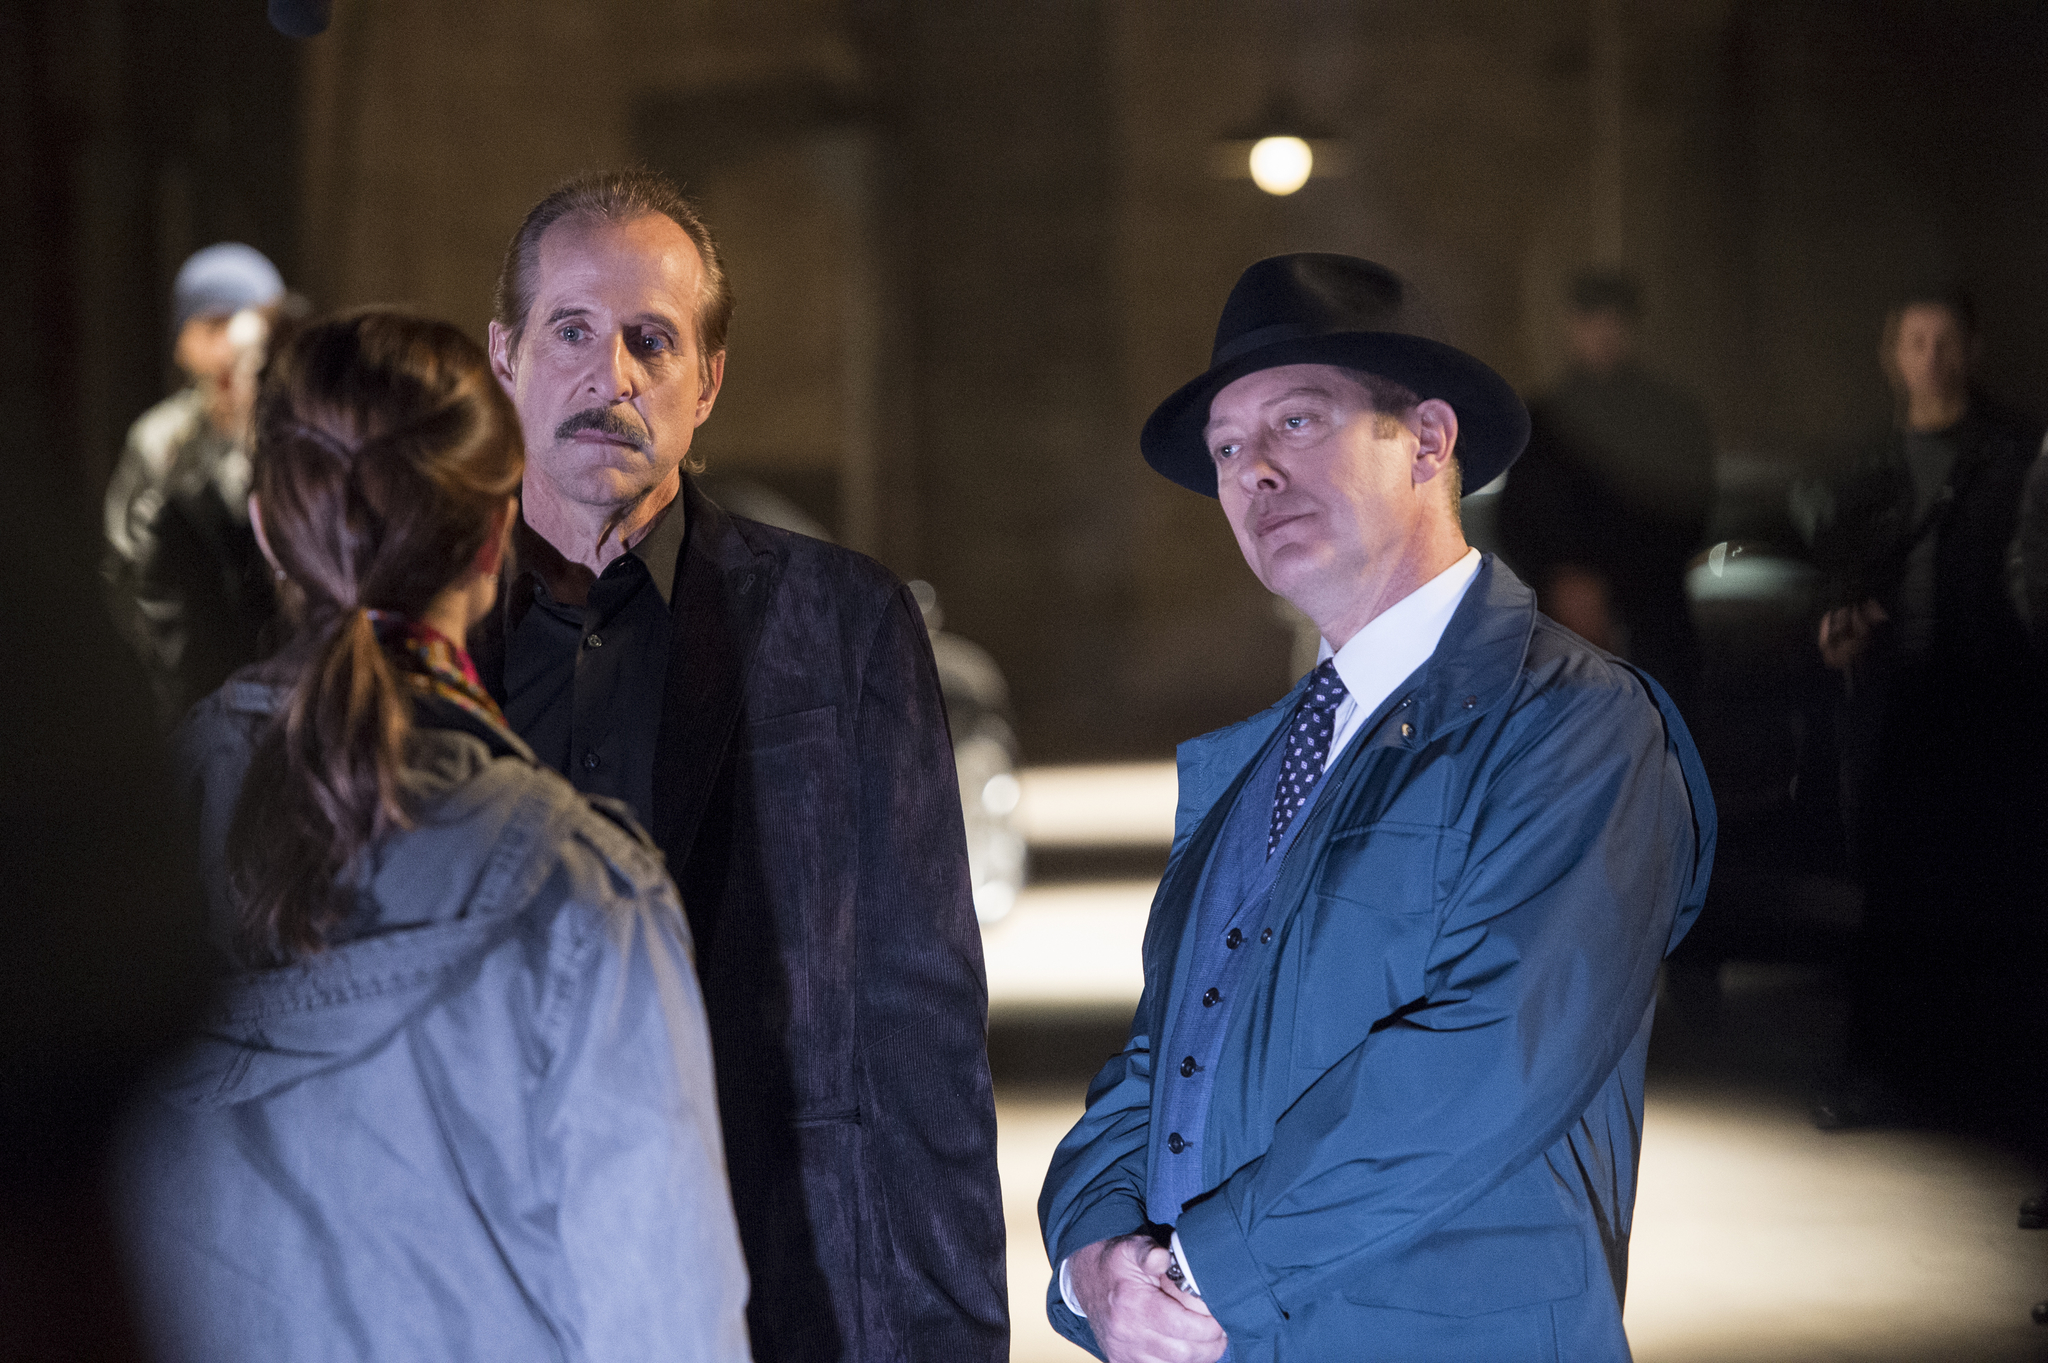 Still of James Spader and Peter Stormare in The Blacklist (2013)